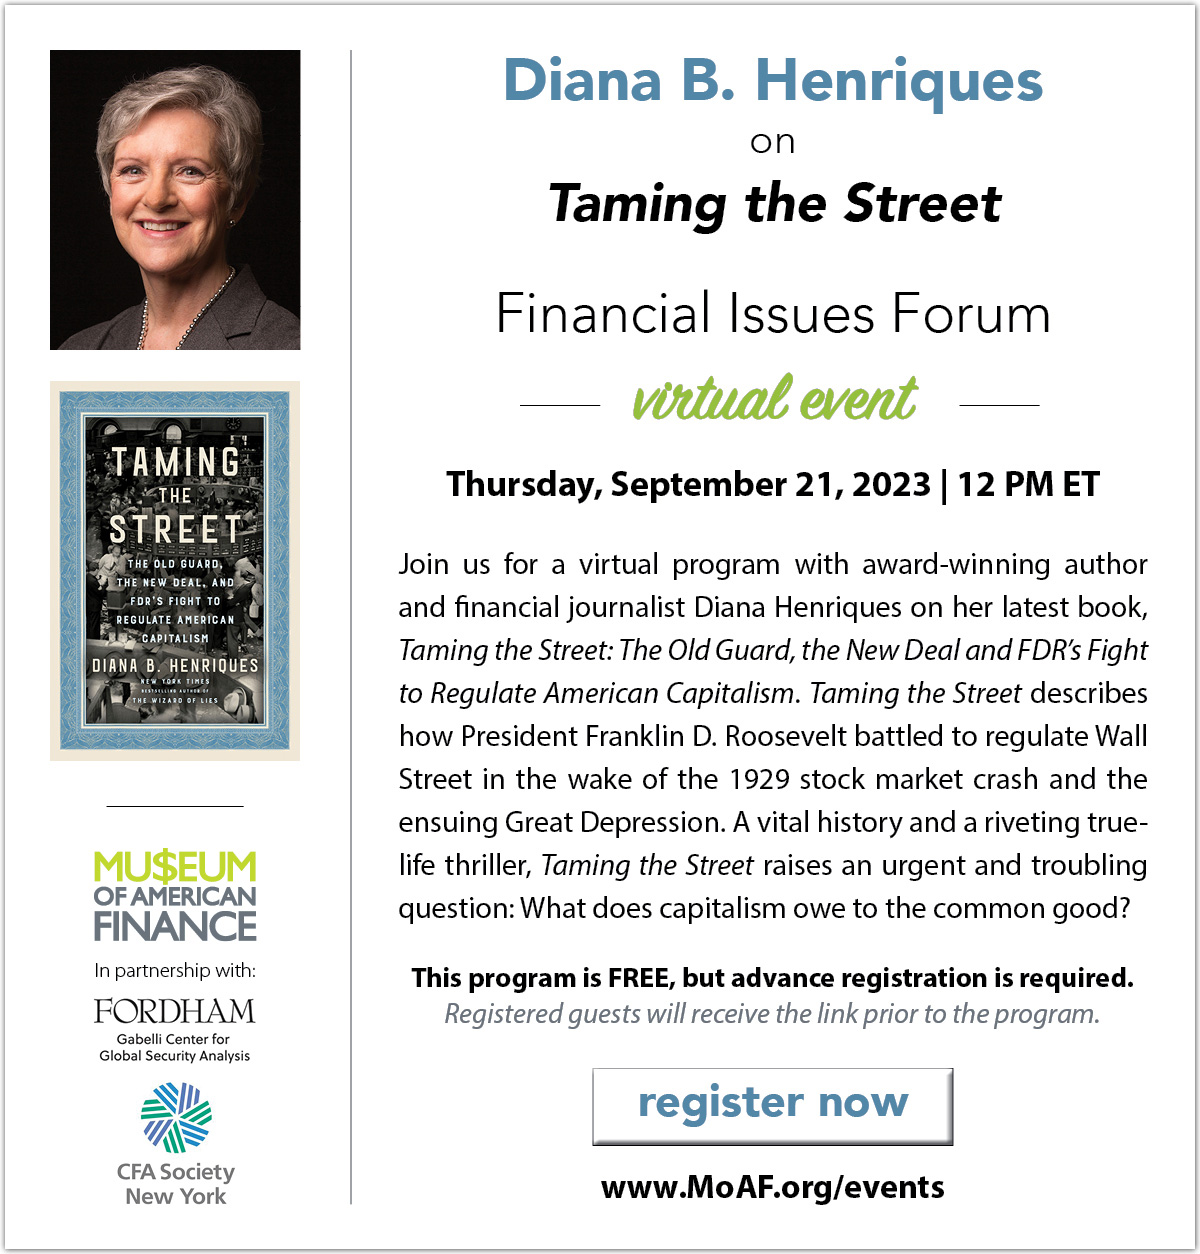 Diana Henriques on Taming the Street